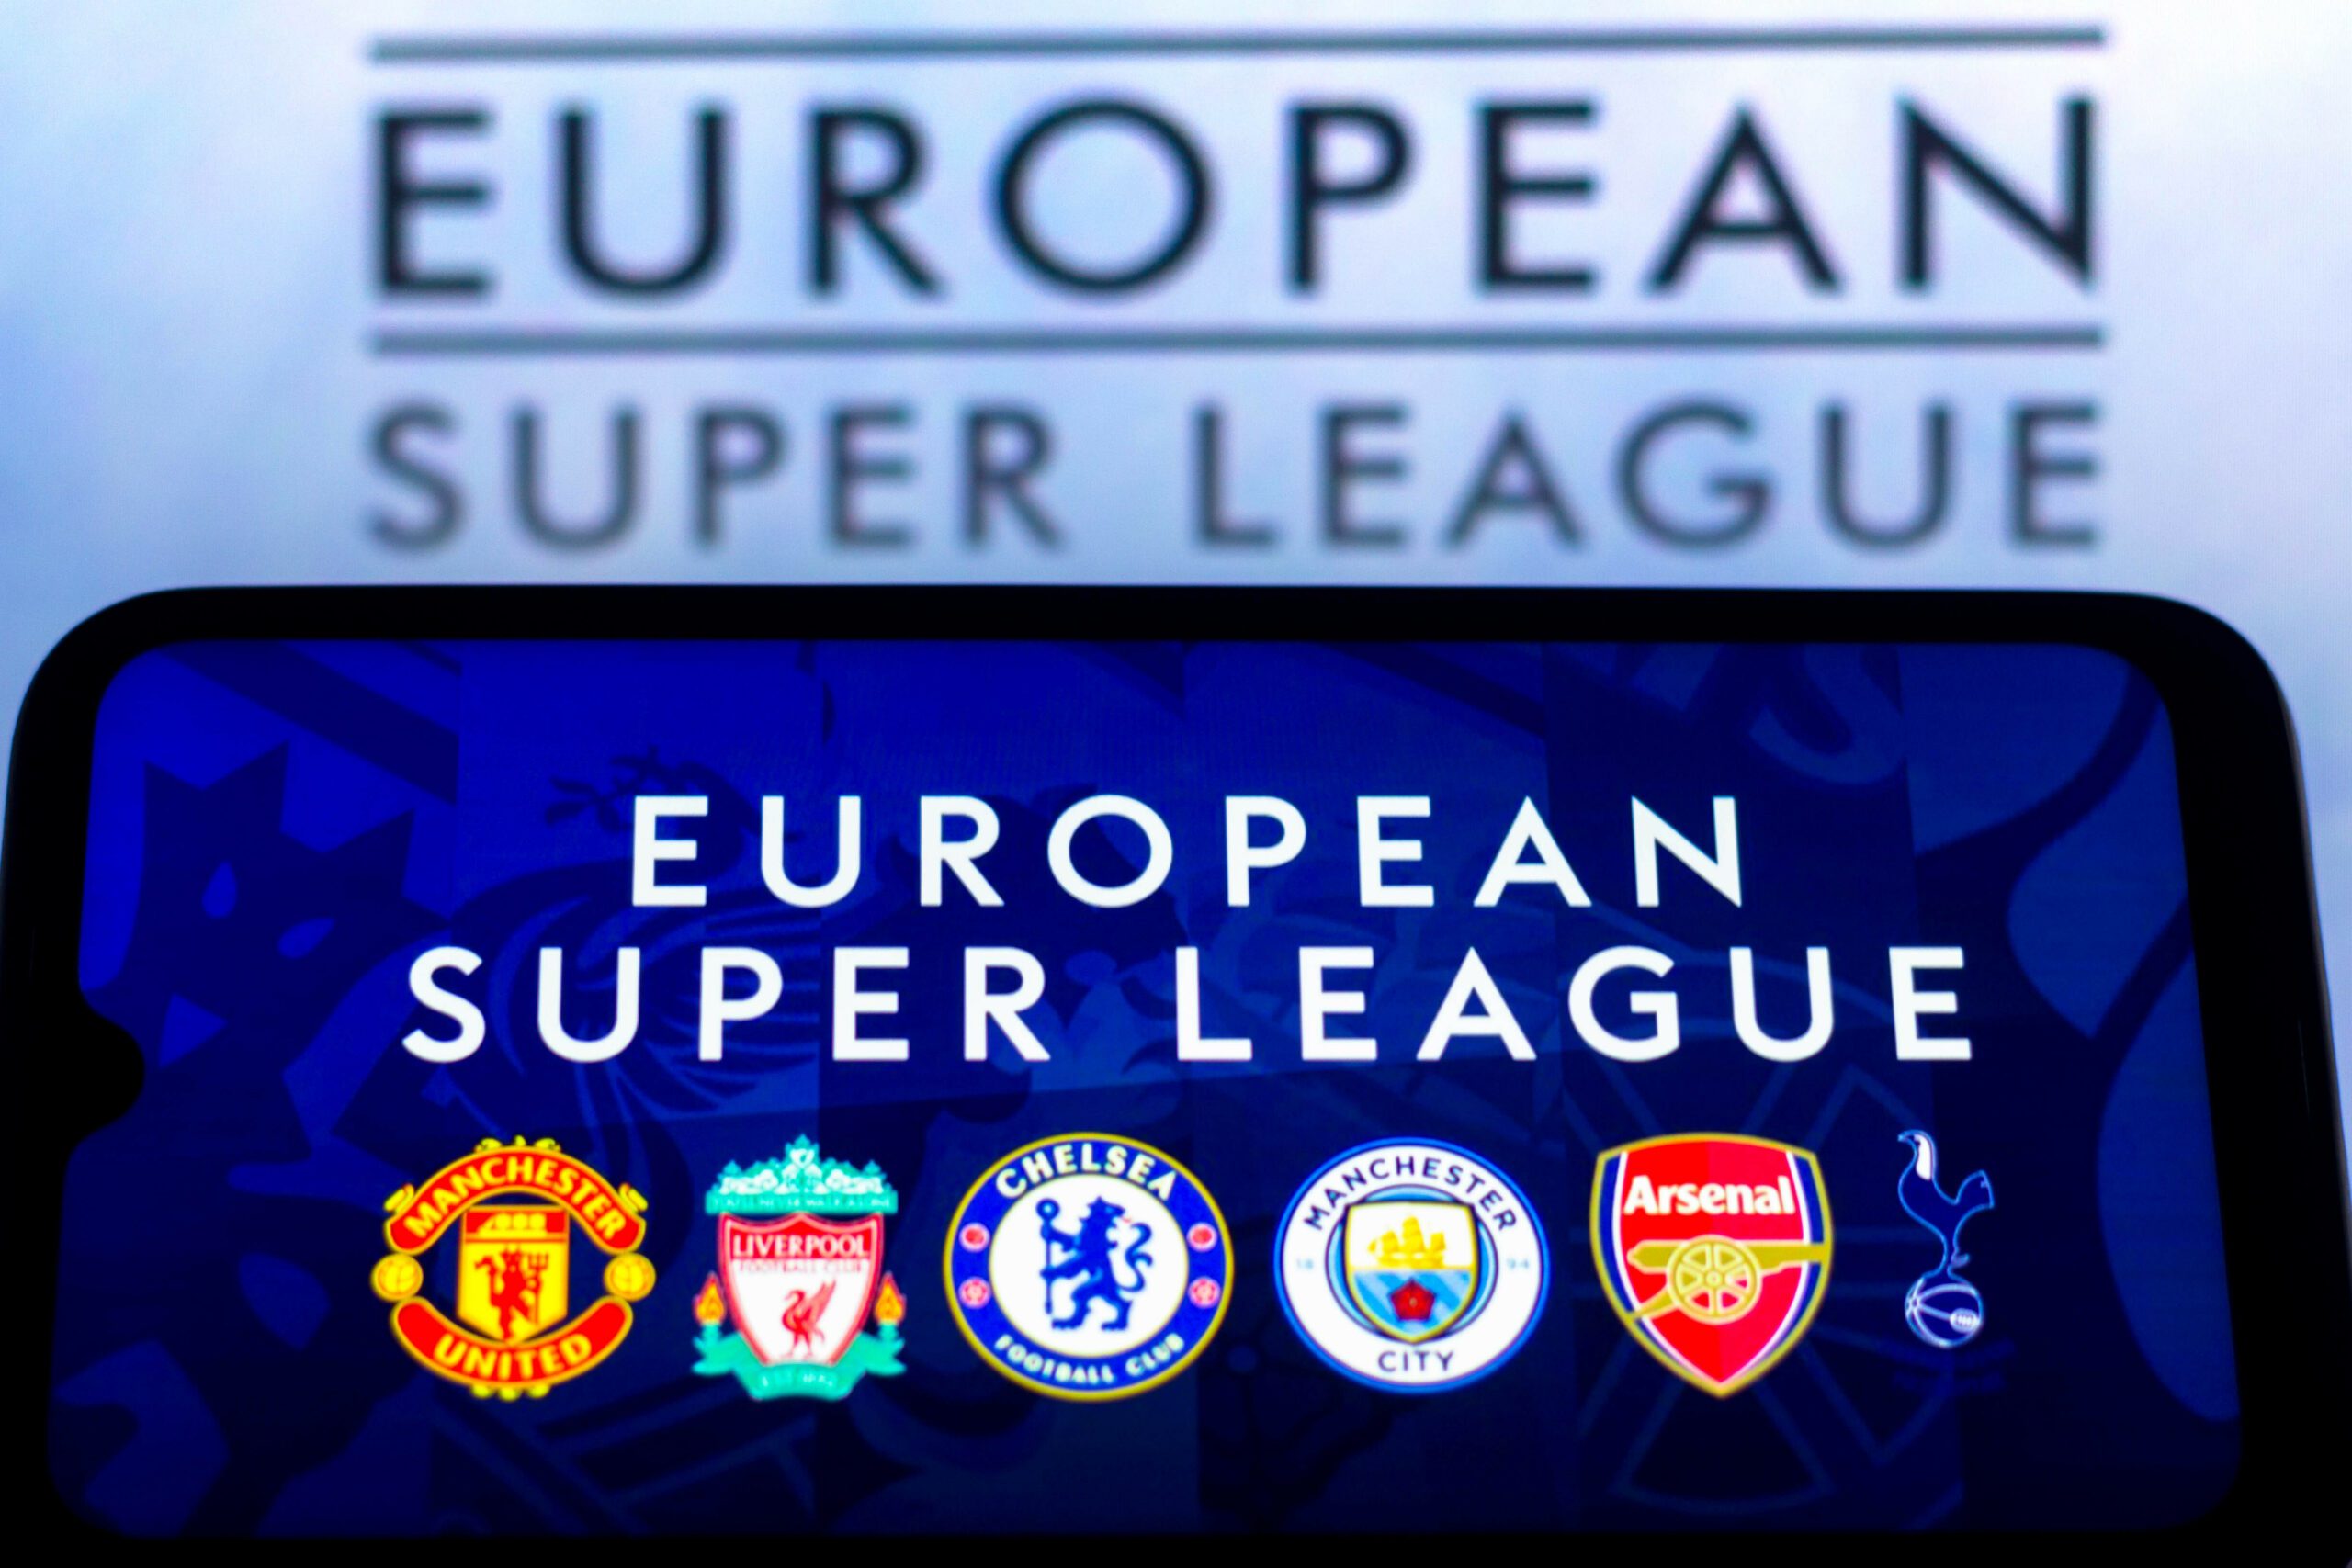 European Super League threatens ANOTHER return, with 20 clubs 'very motivated' by competition